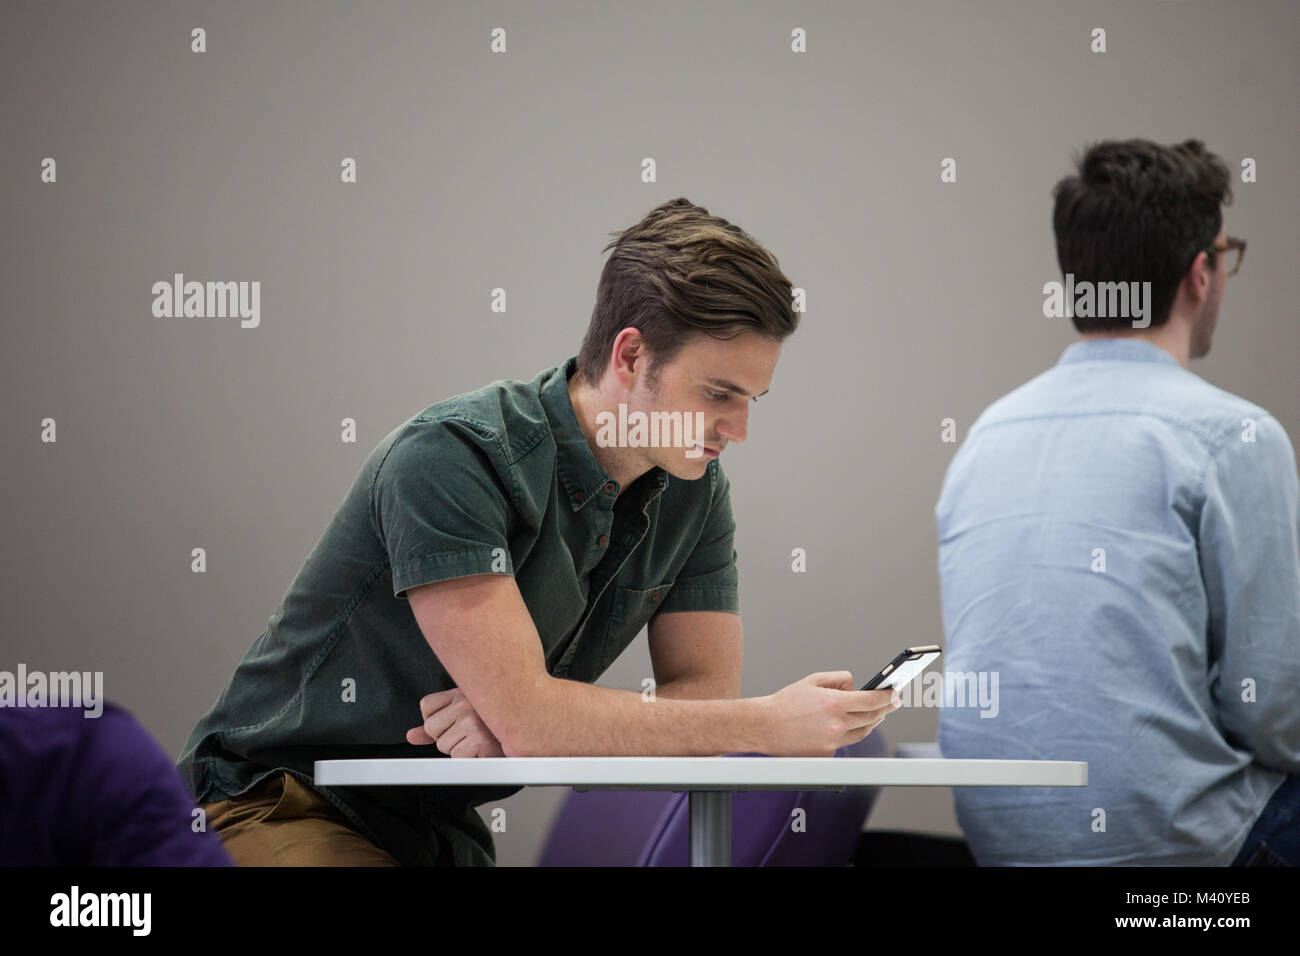 Man using smartphone in waiting area Stock Photo